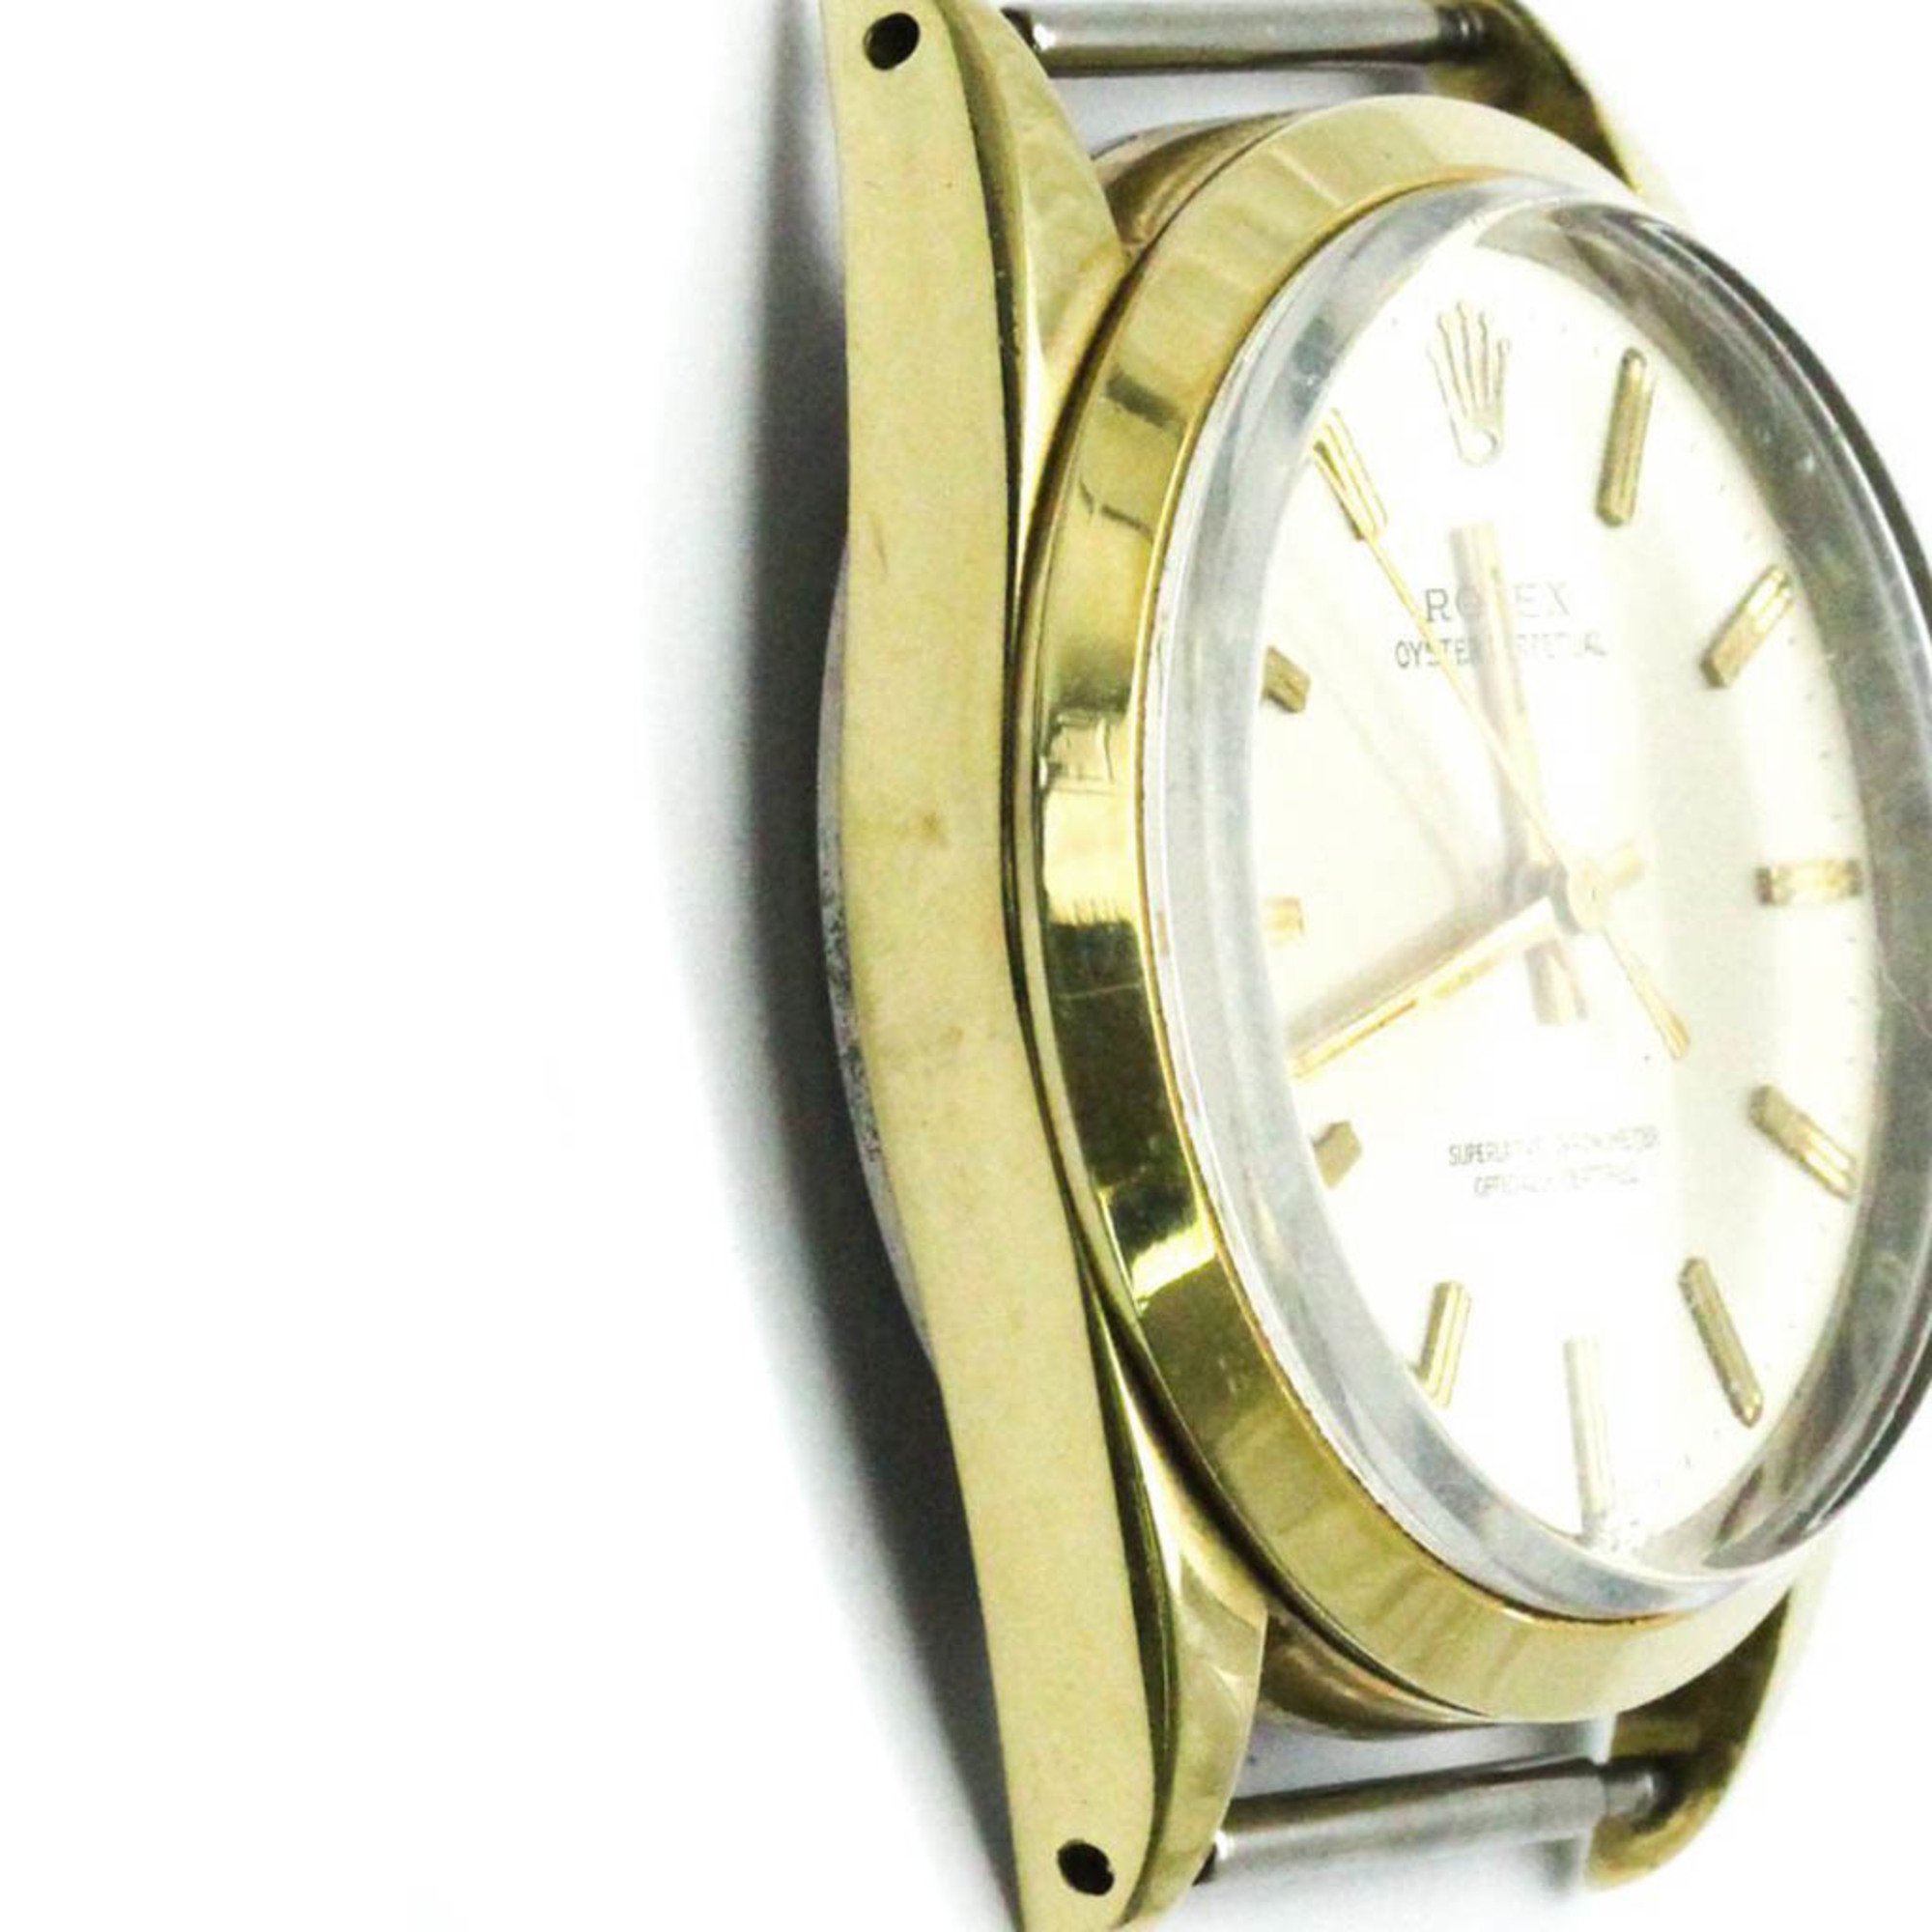 Vintage ROLEX Oyster Perpetual Gold Plated Mens Watch 1024 Head Only BF571678